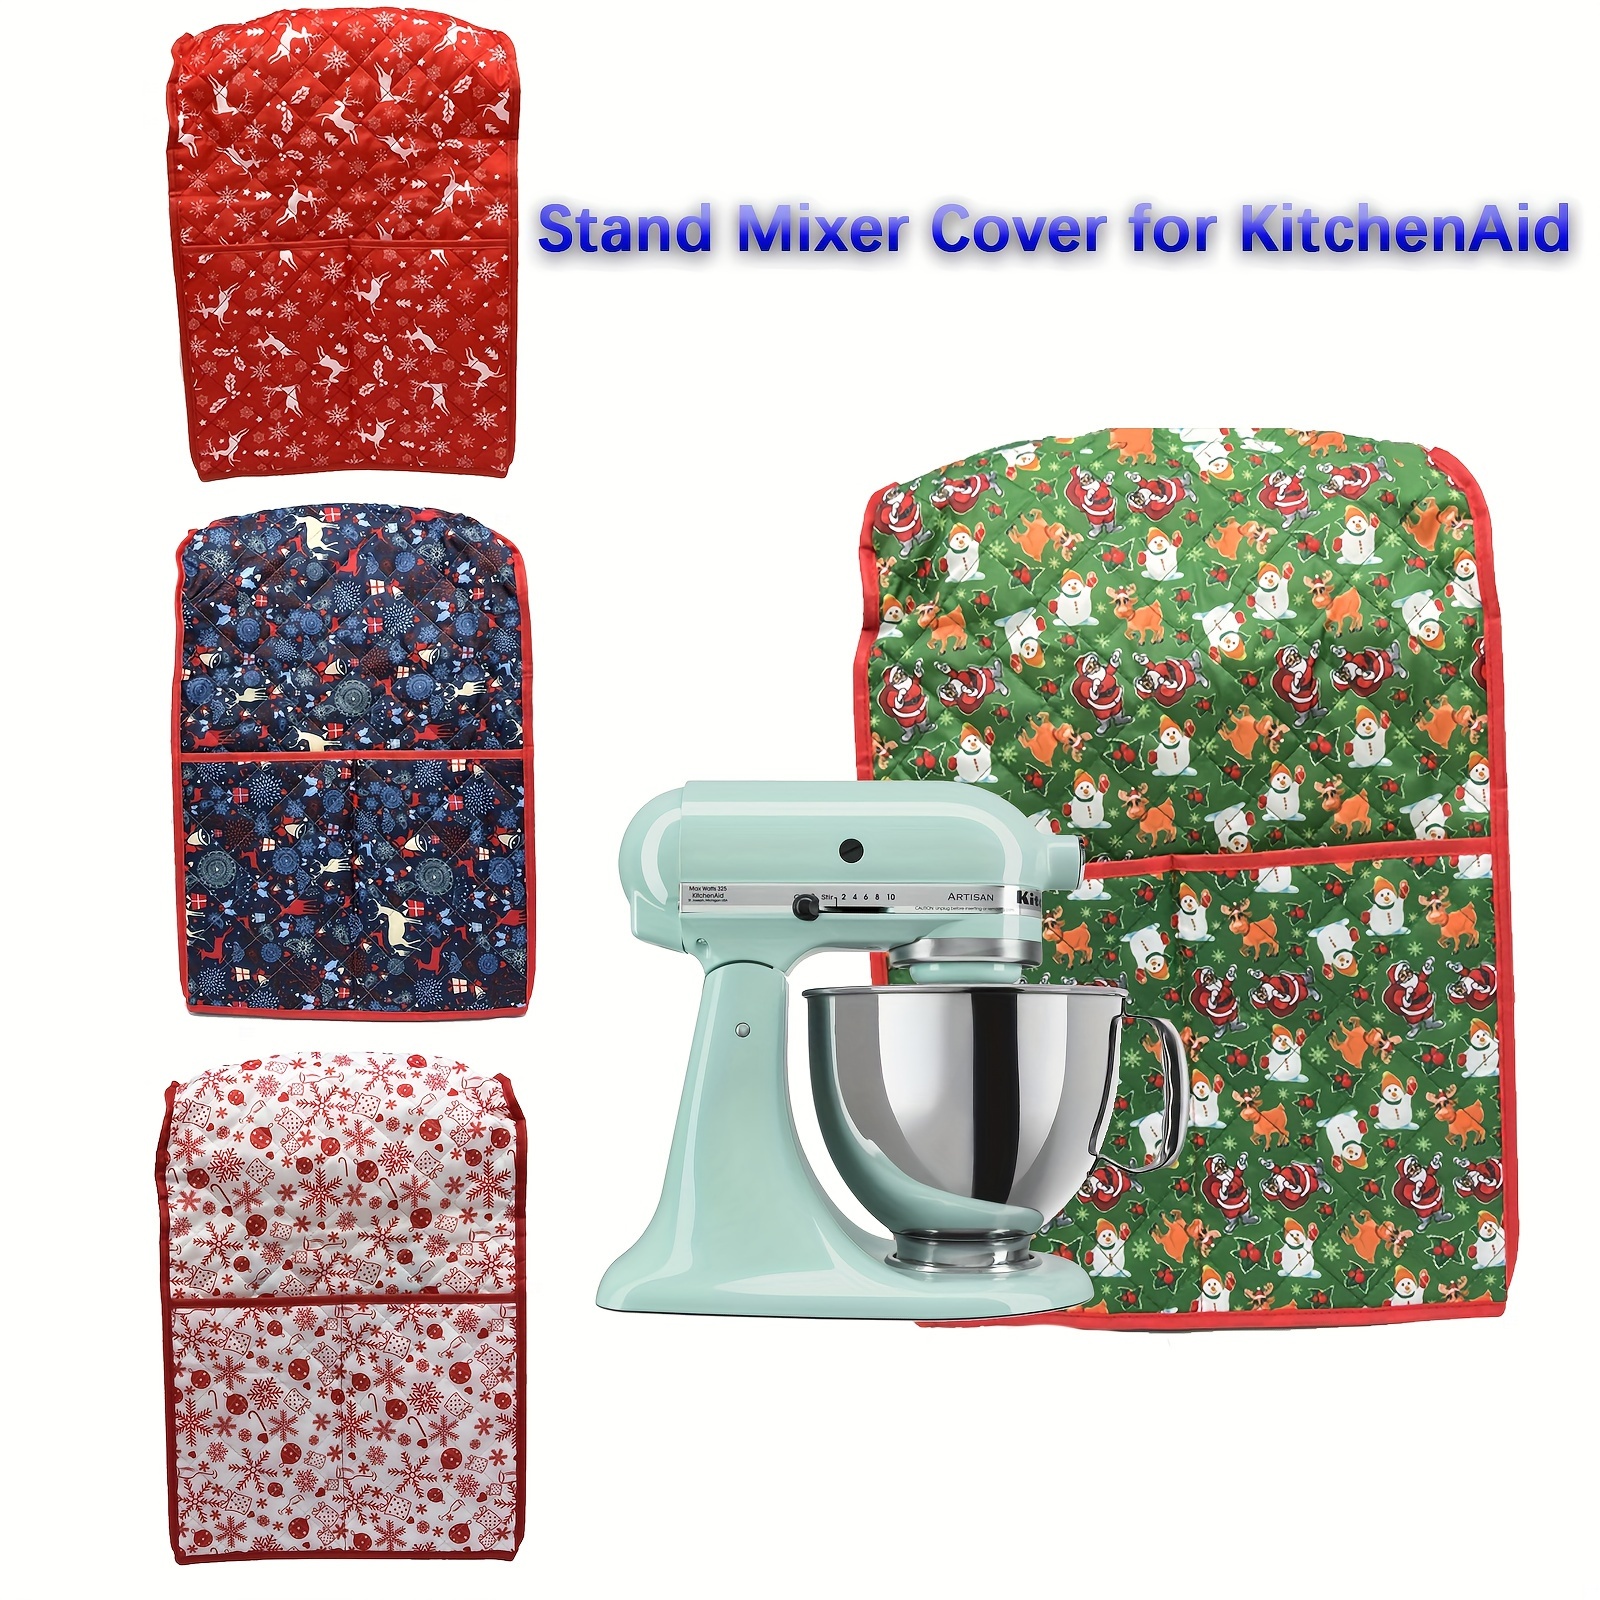 HUISEFOR Stand Mixer Cover Compatible with Kitchen Aid Mixer